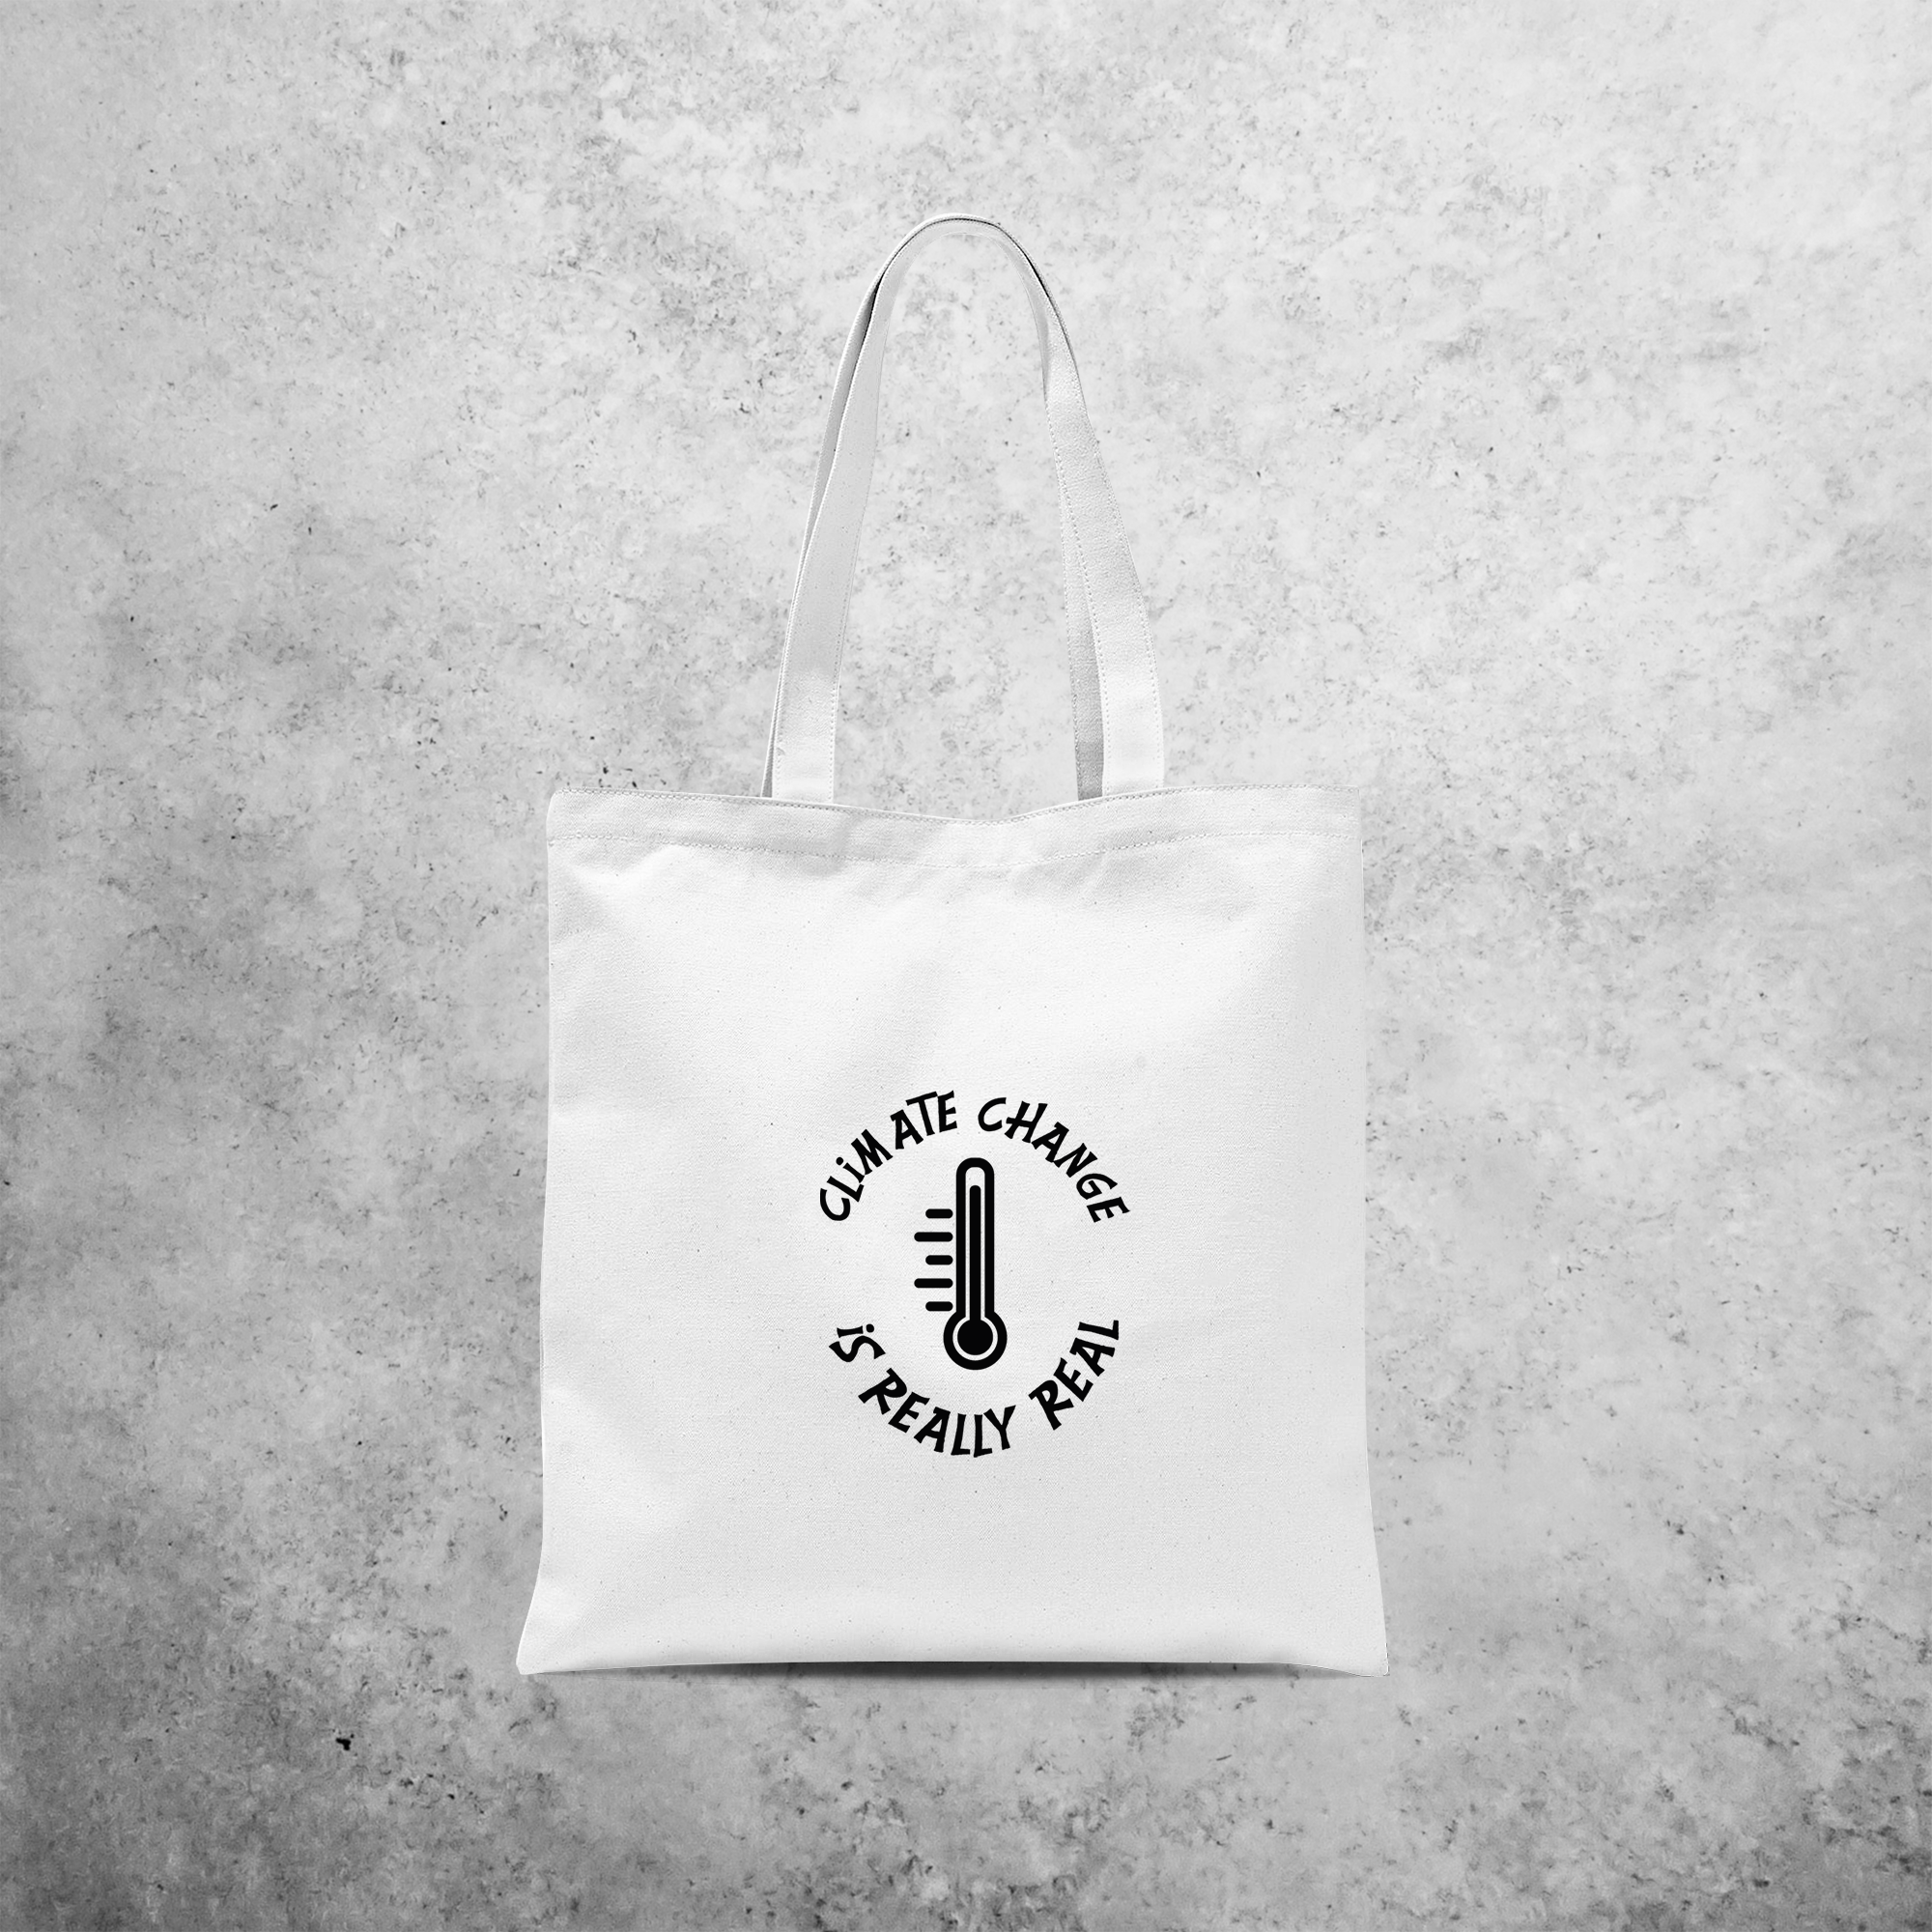 'Climate change is really real' tote bag